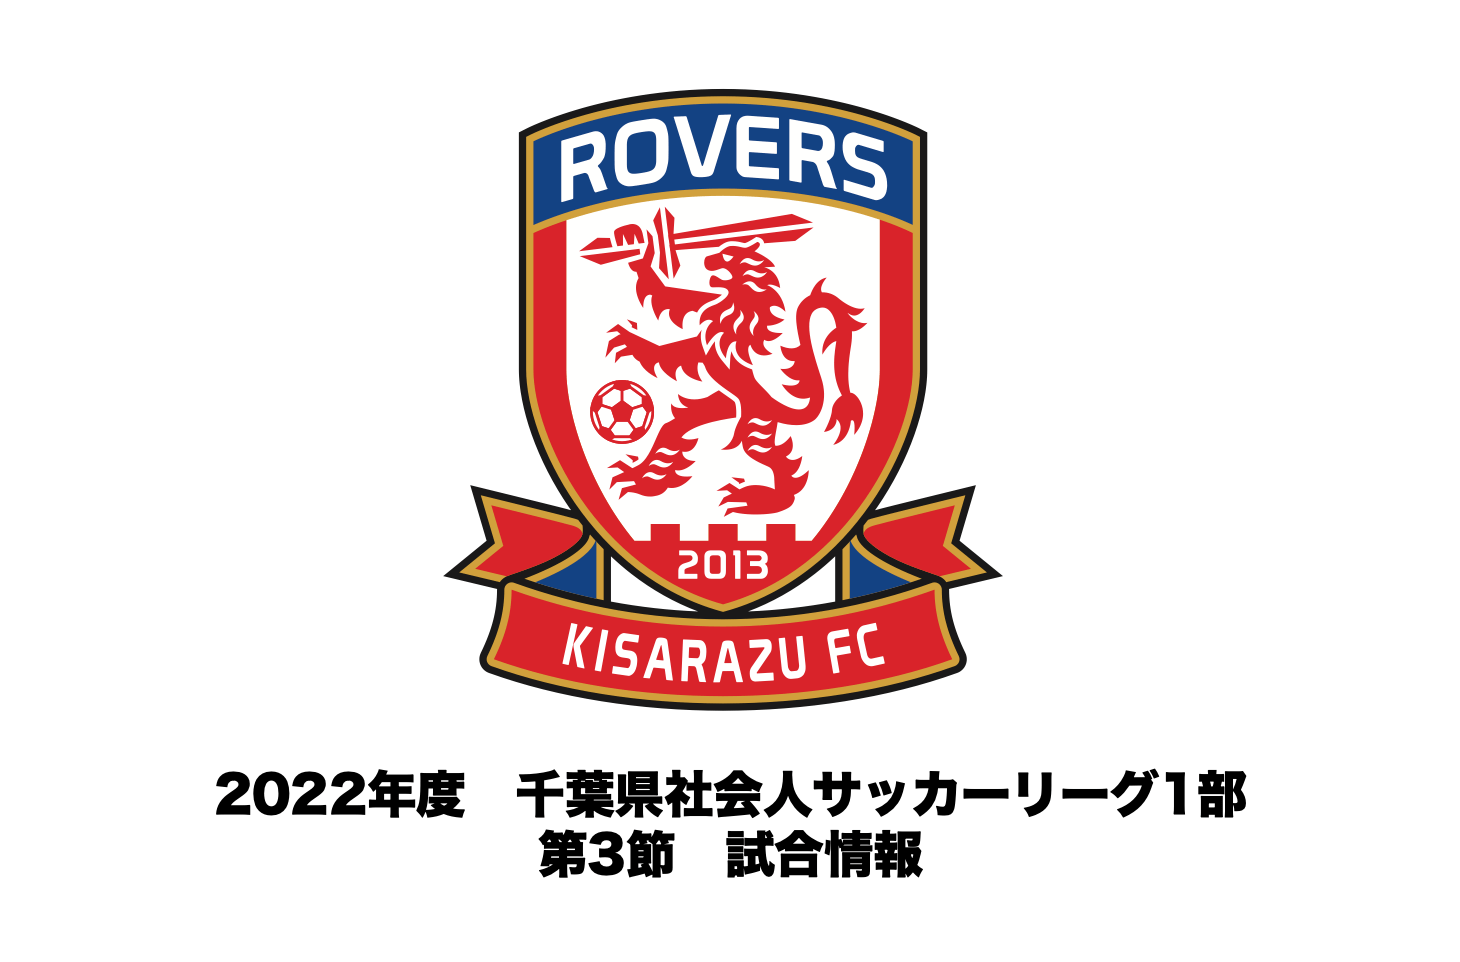 You are currently viewing ☆有観客開催☆【試合情報】2022年度 千葉県社会人サッカーリーグ1部 第3節について